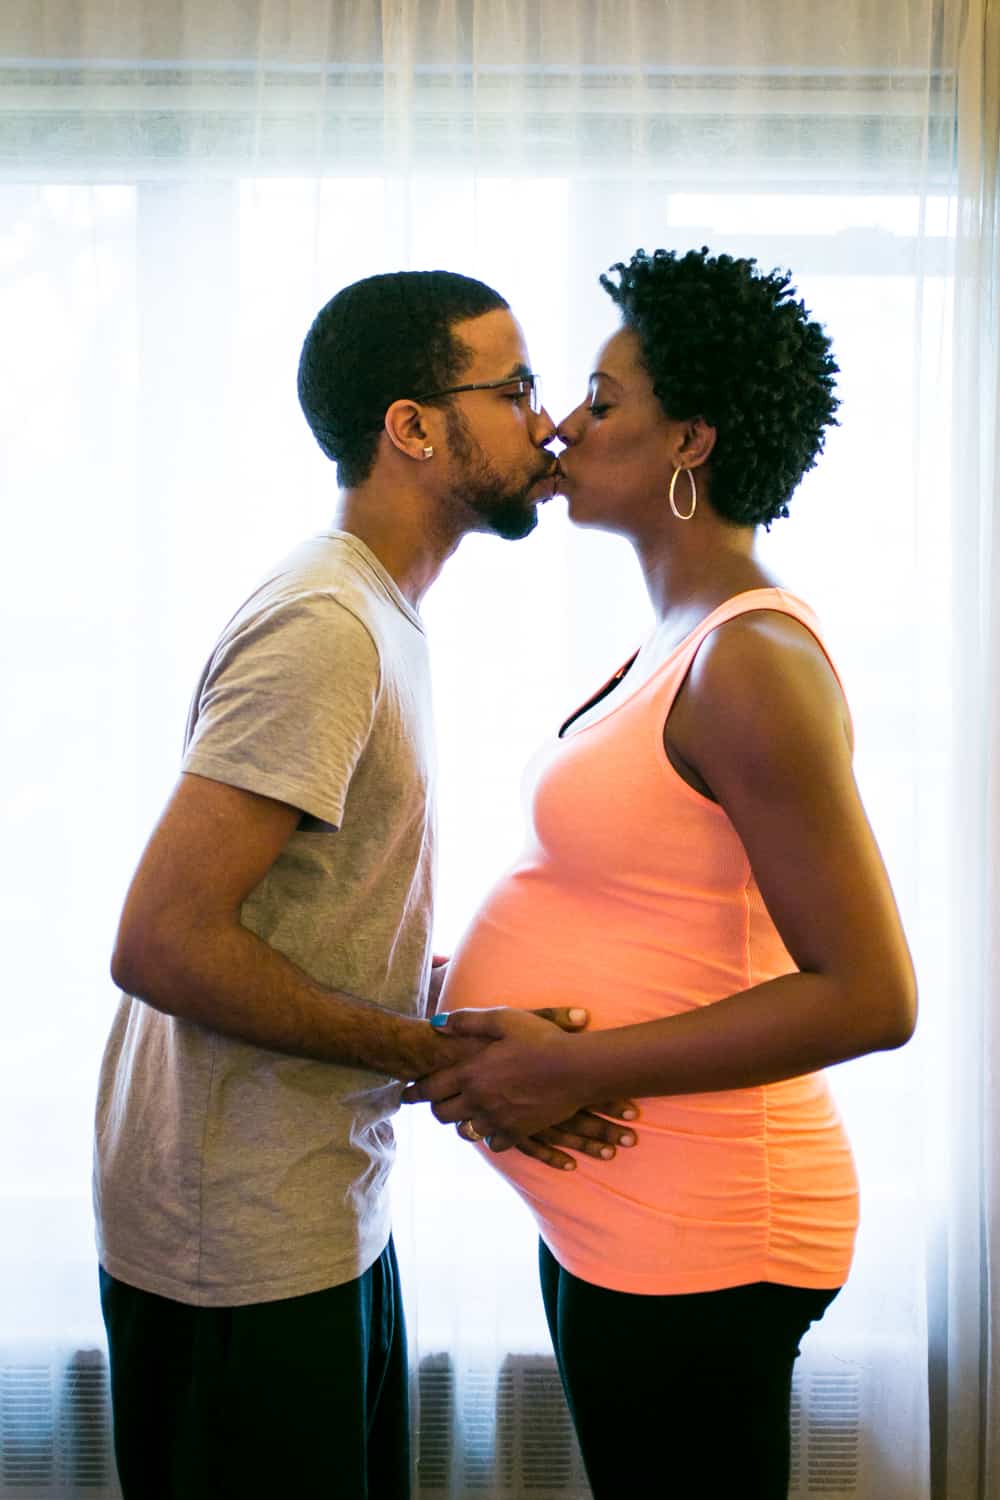 Parents-to-be kissing in front of window for a Queens maternity photo shoot